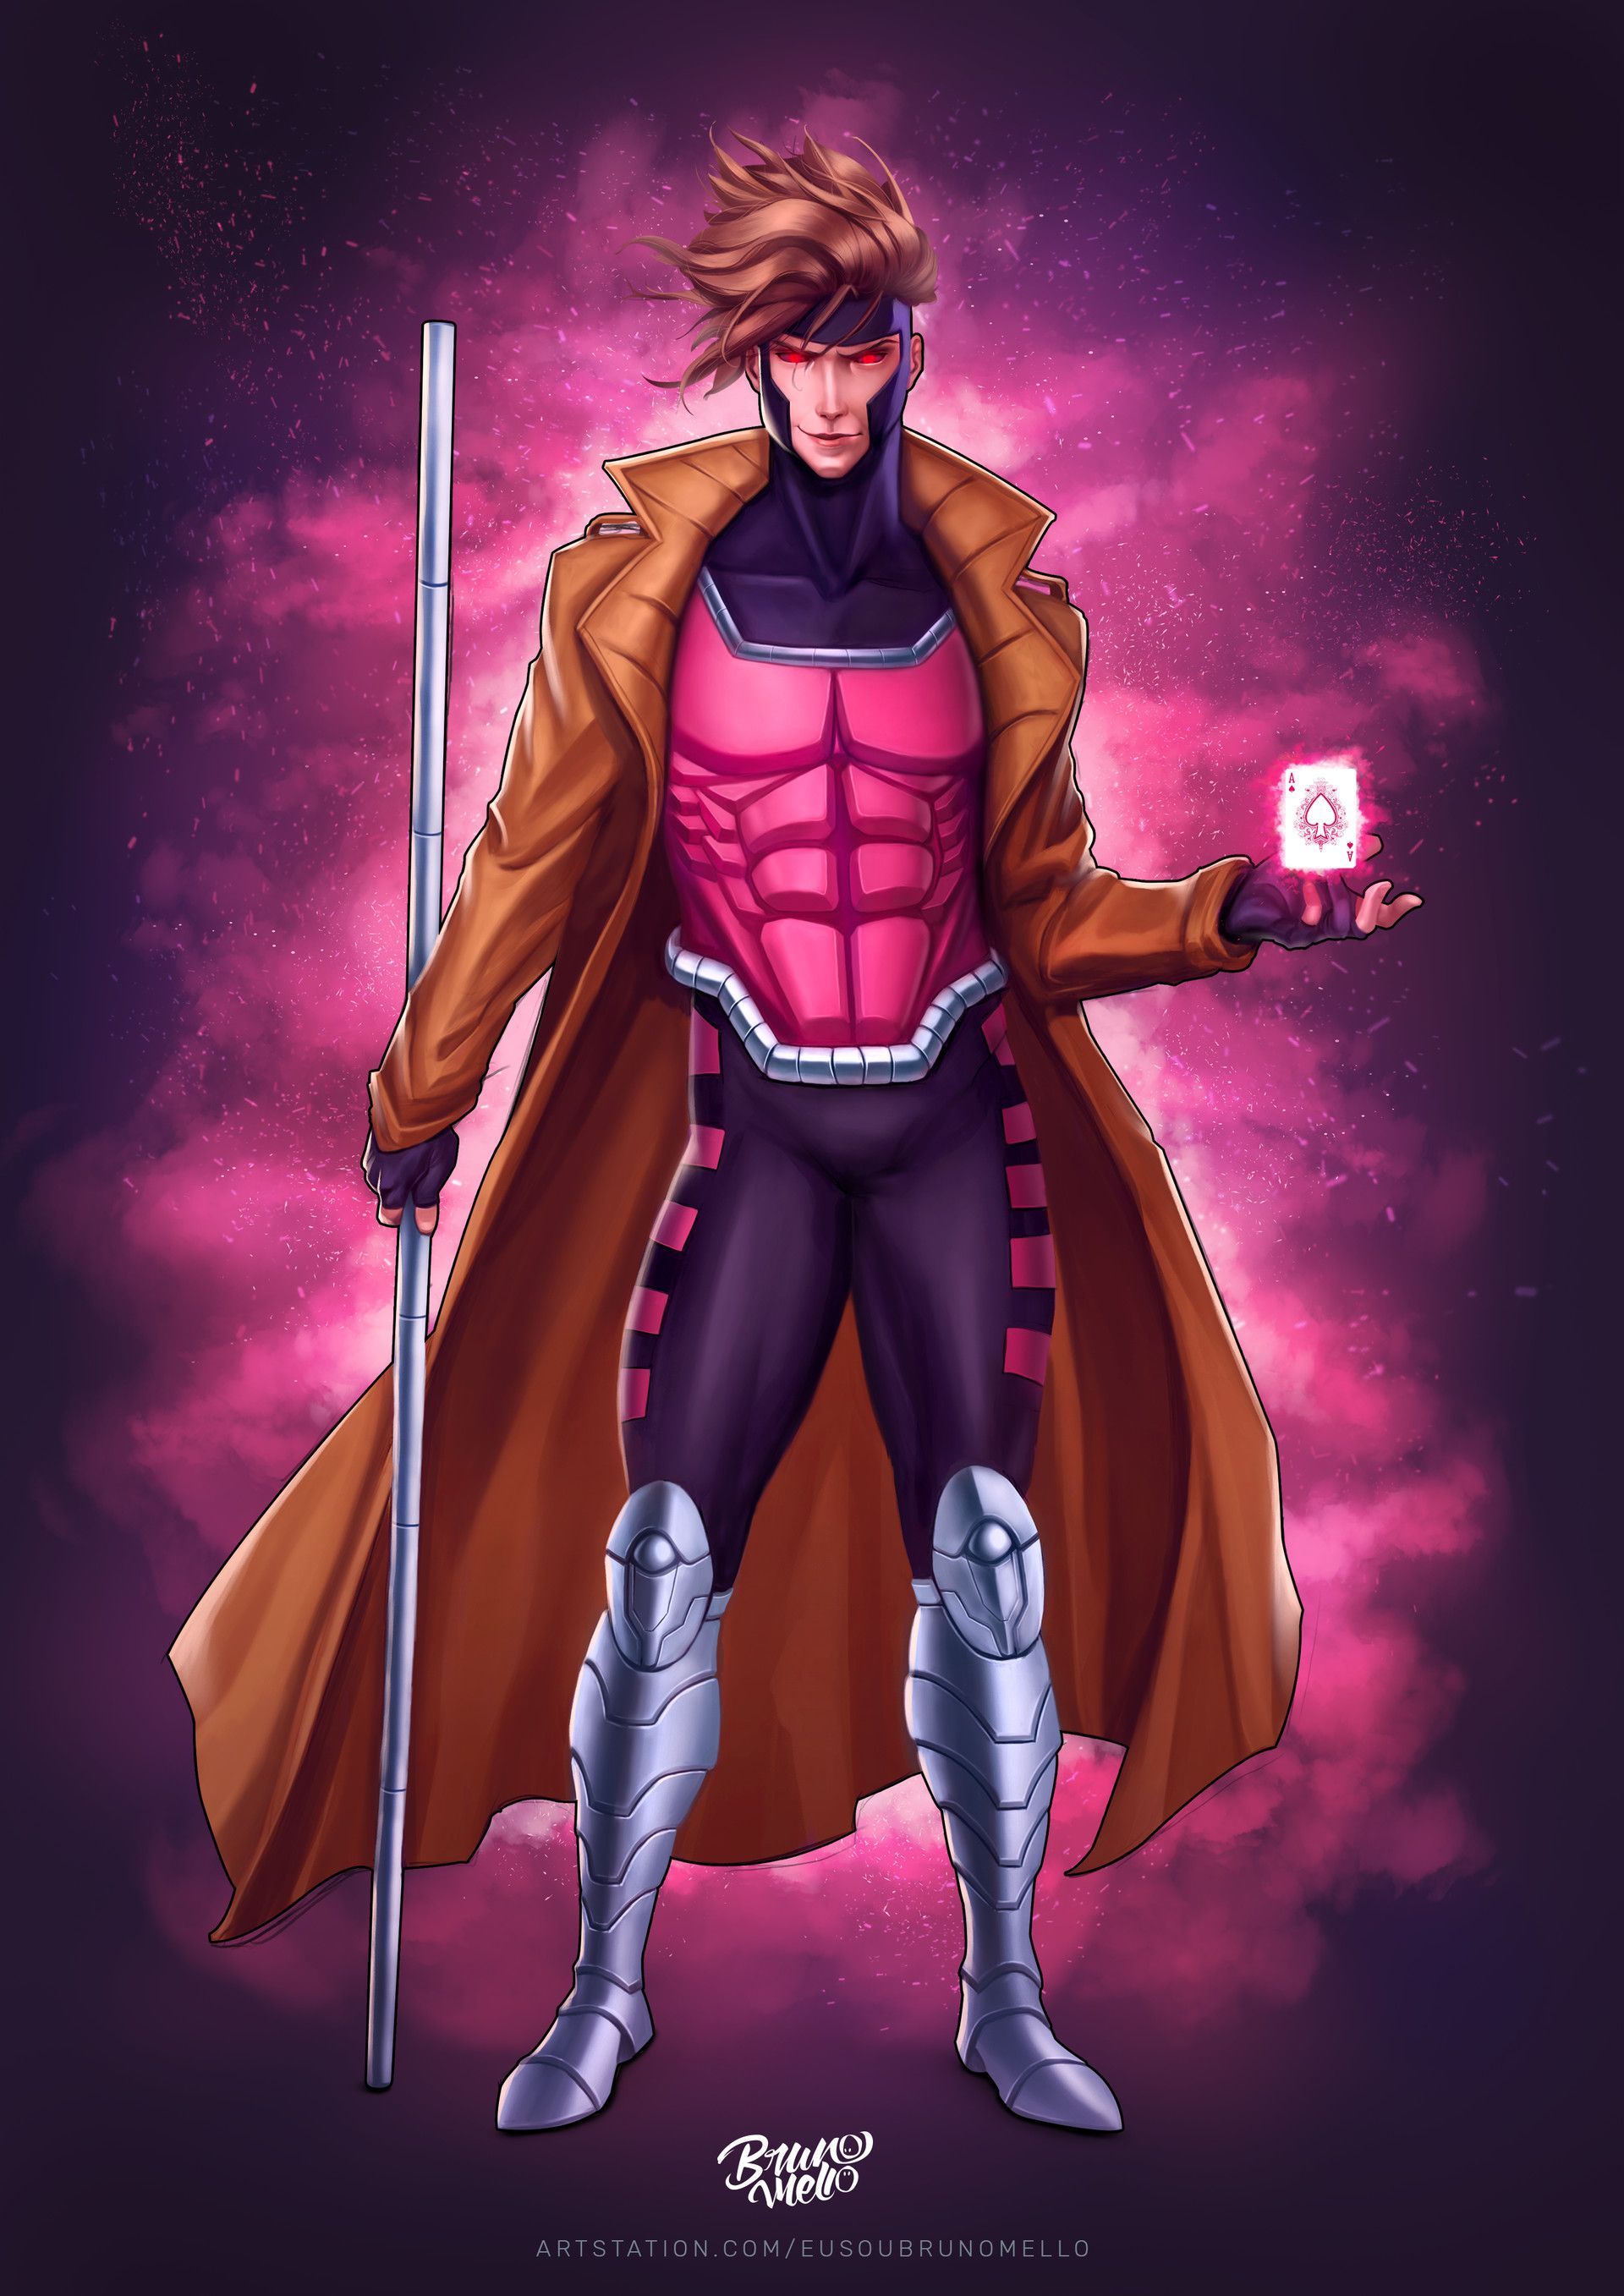 Gambit By Bruno Mello (cdna.artstation.com) Submitted By I_Burn_Cereal To R ImaginaryMutants 1 Comments Original. Xmen Comics, Gambit Marvel, Marvel Superheroes